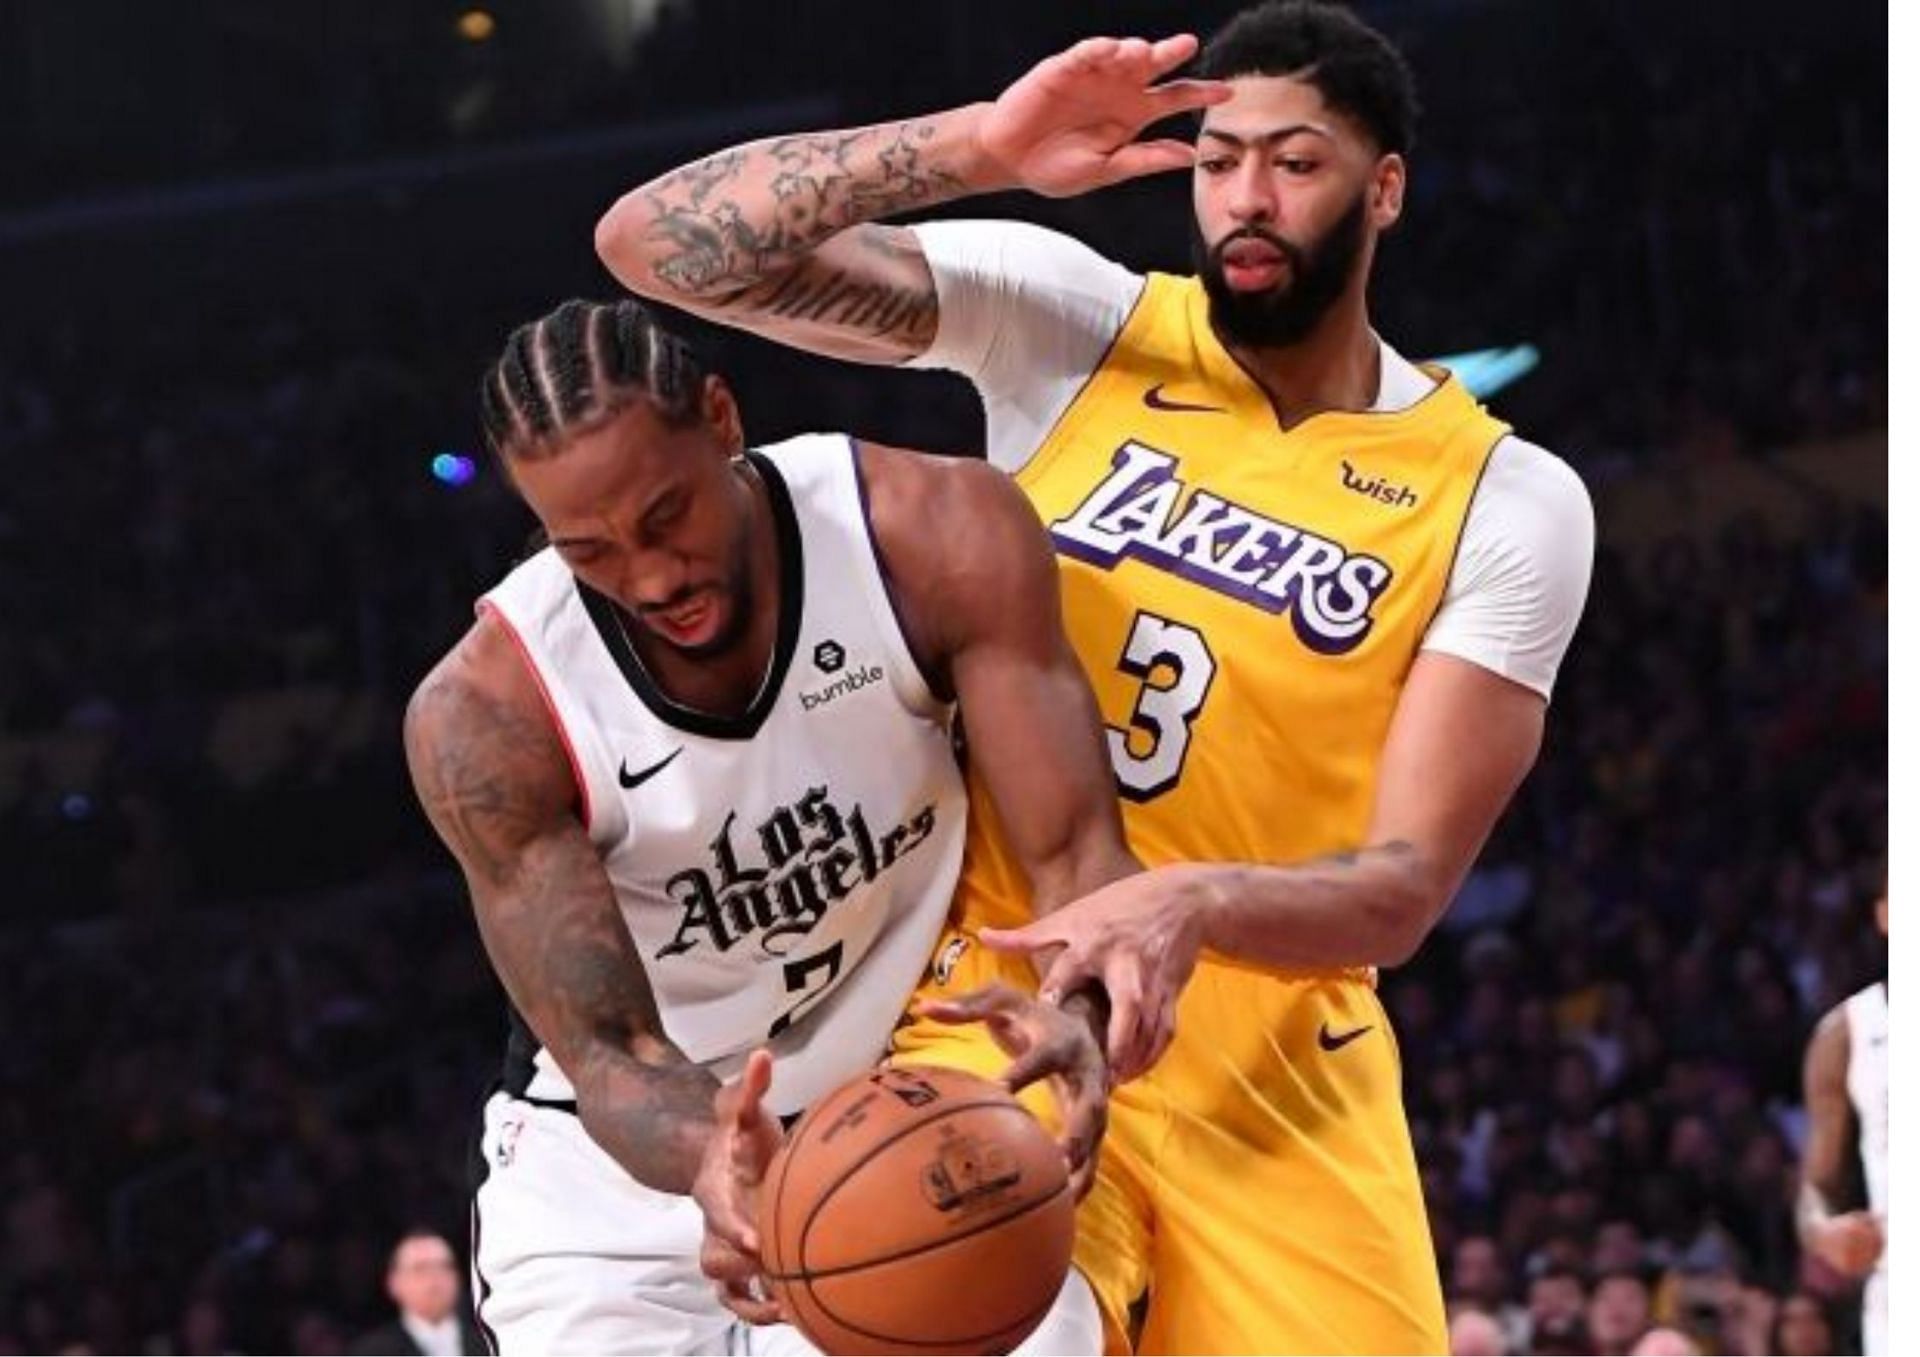 Kawhi Leonard will lead the LA Clippers on Wednesday night against the LA Lakers.